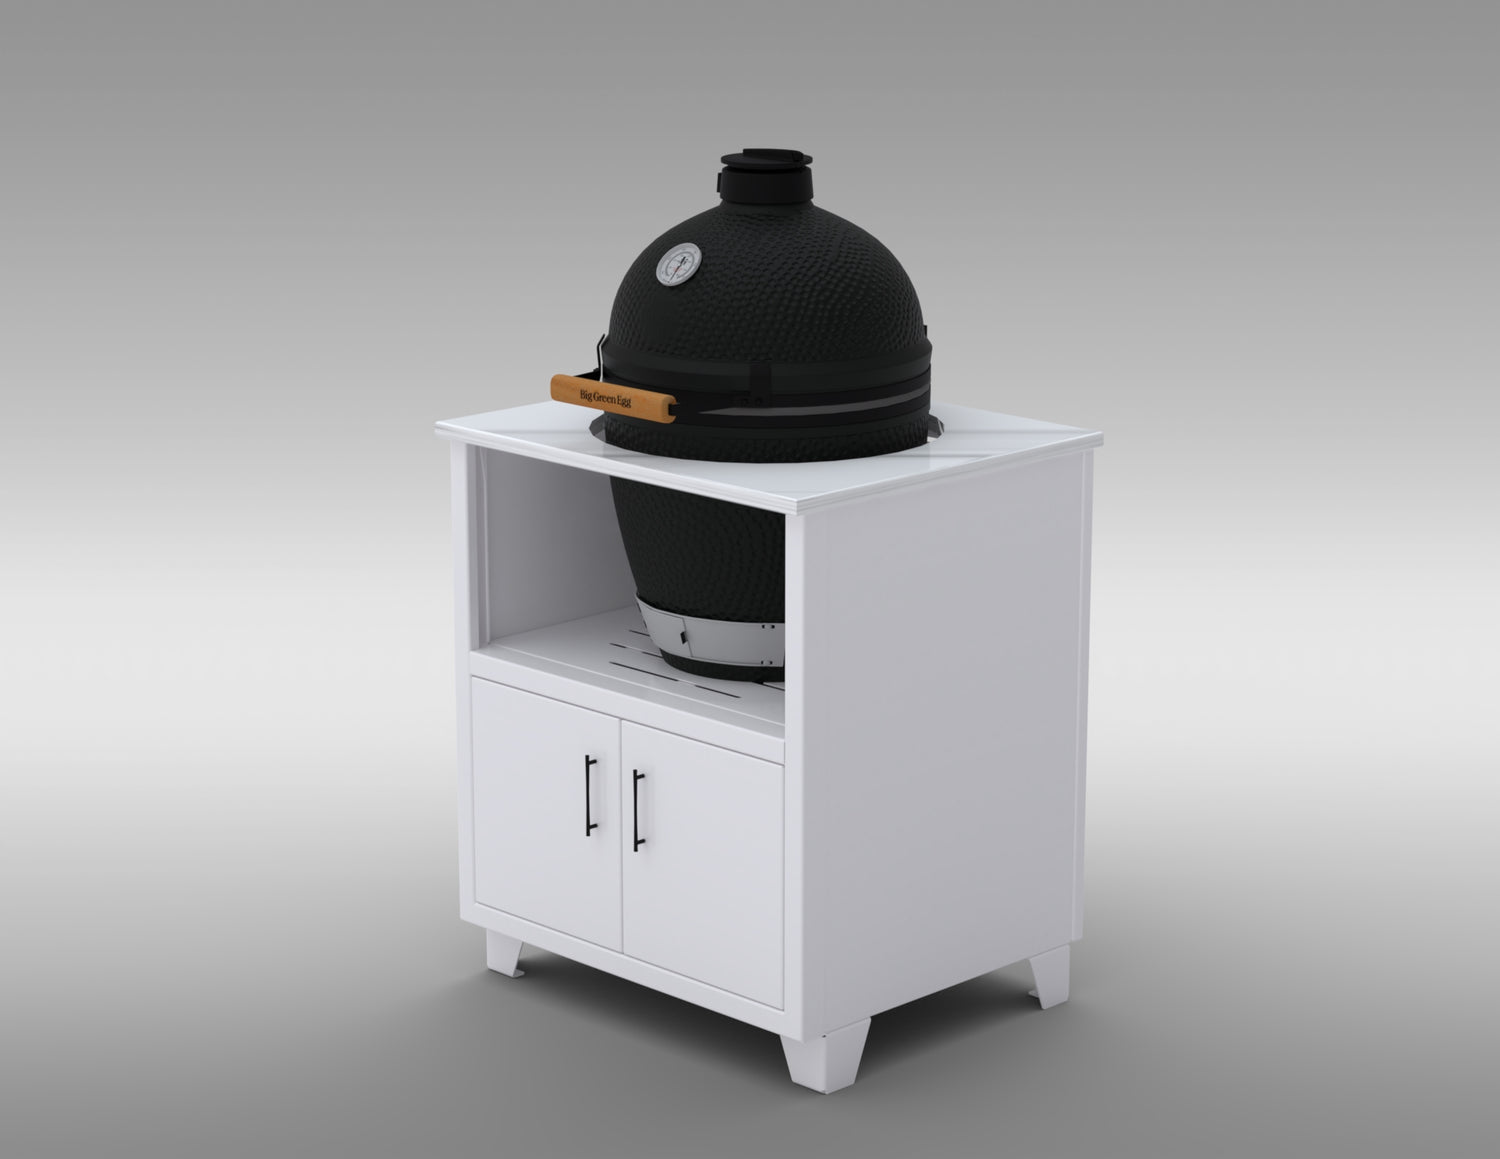 Grill and Ceramic Kamado Grill Cabinets